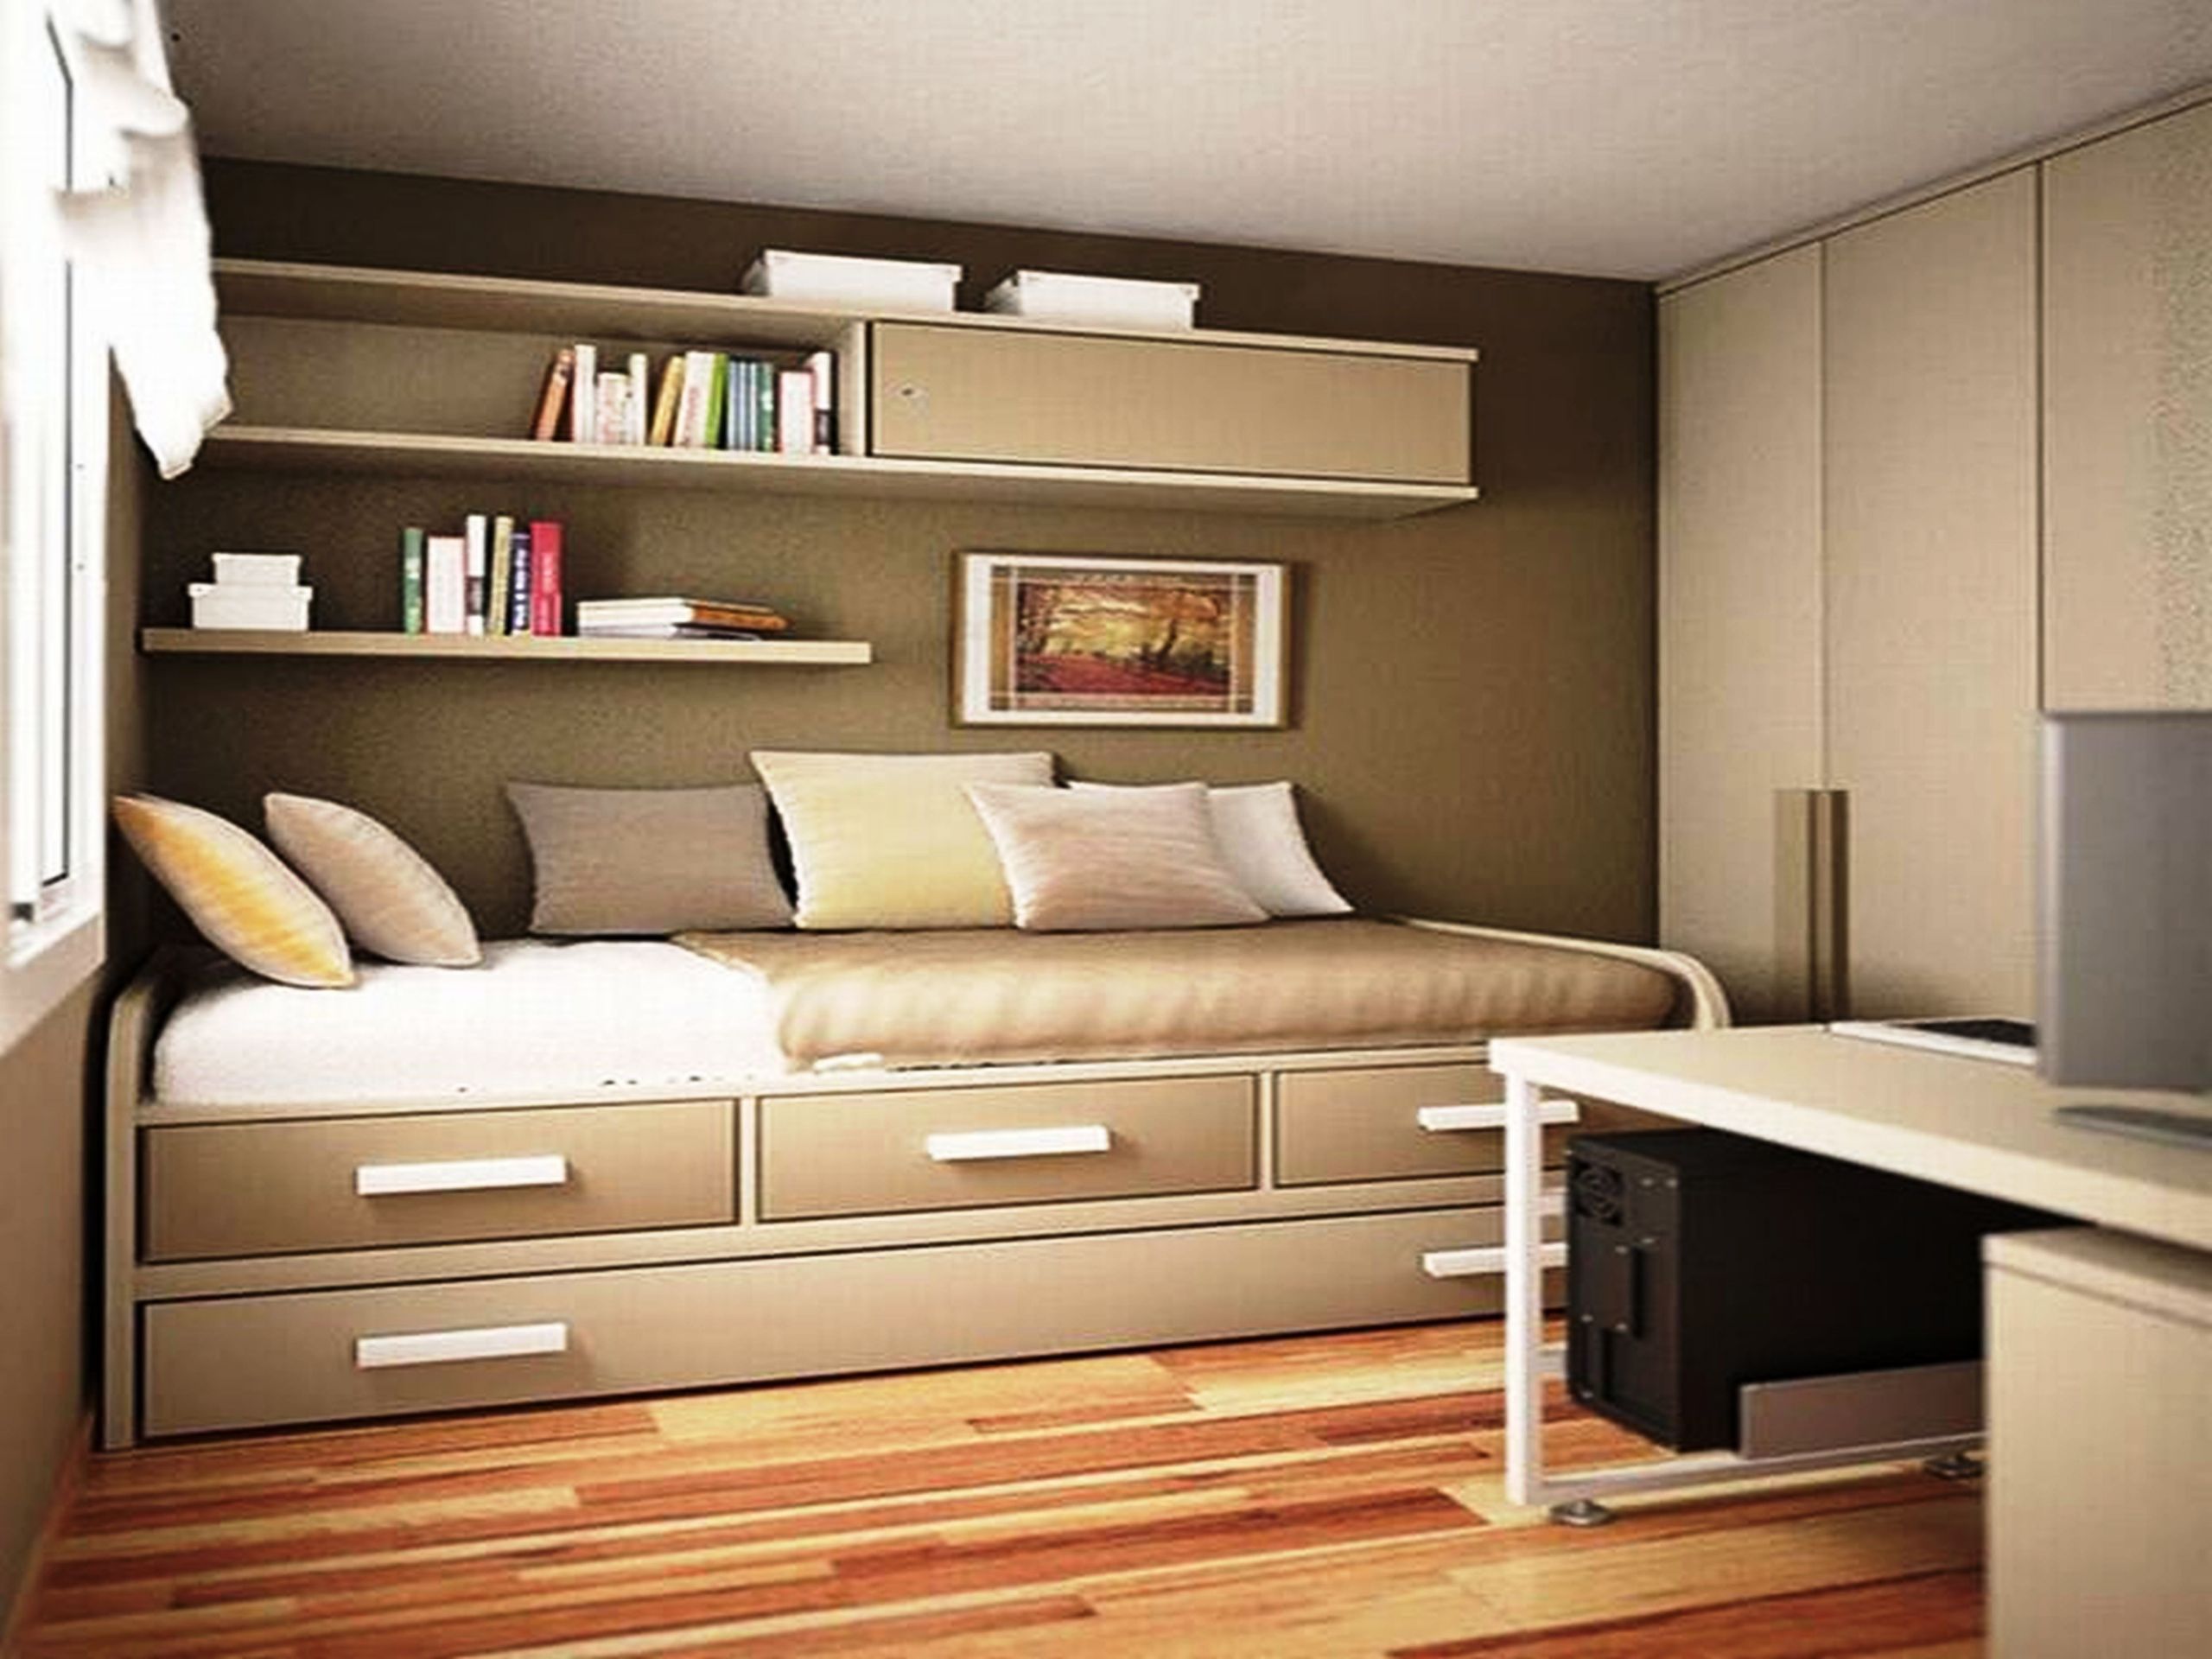 Dresser Ideas For Small Bedroom
 Ikea bedroom furniture for small spaces